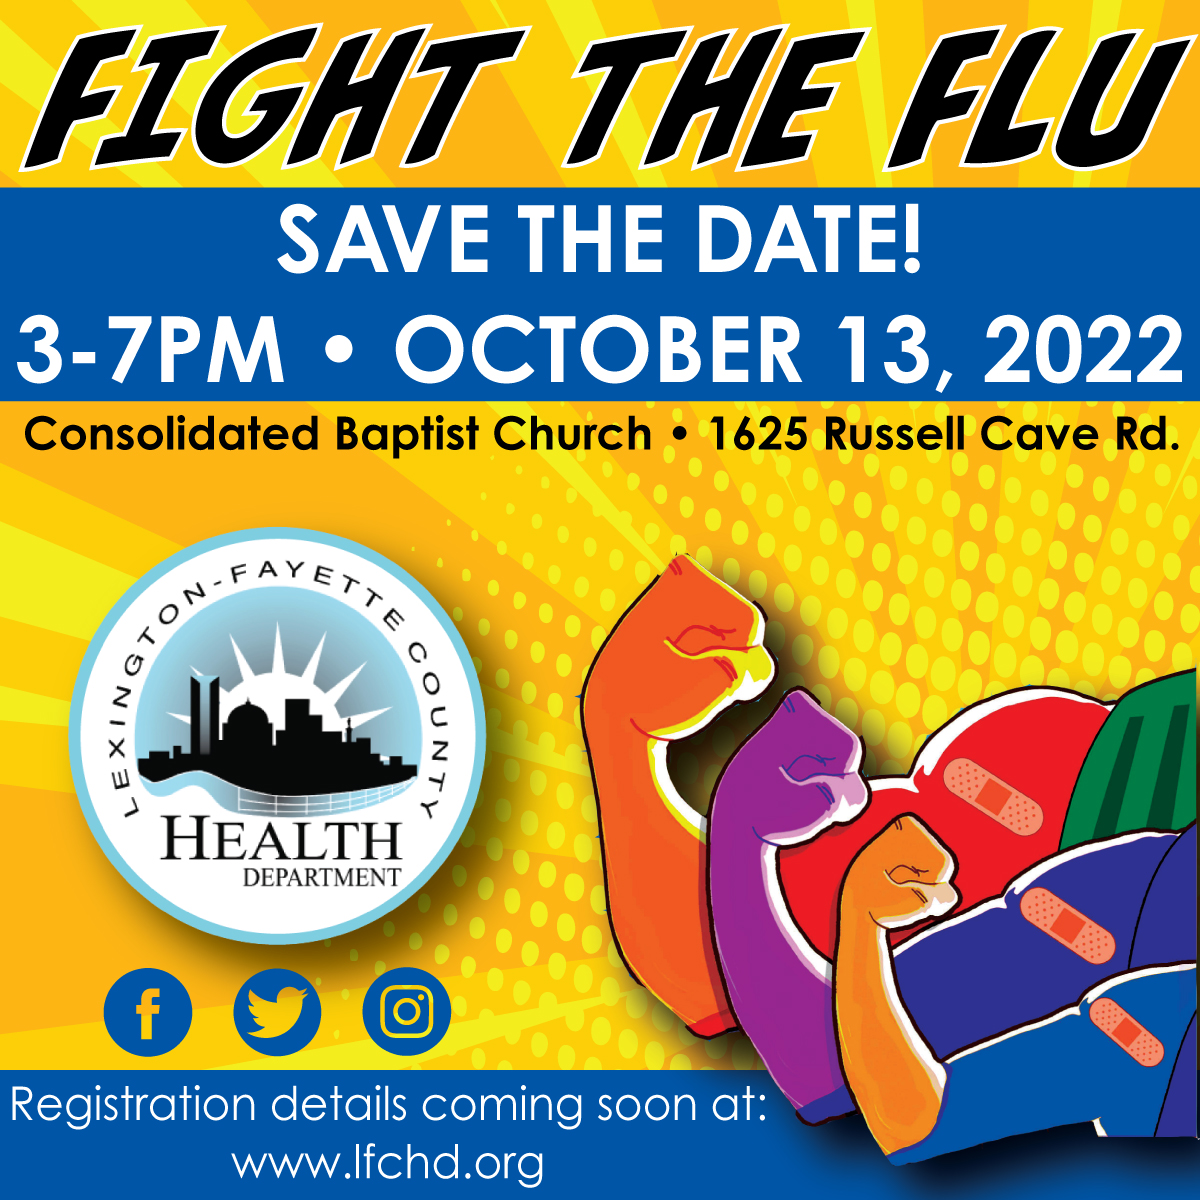 Save the date: 2022 Free Flu Shot Clinic to be held Oct. 13